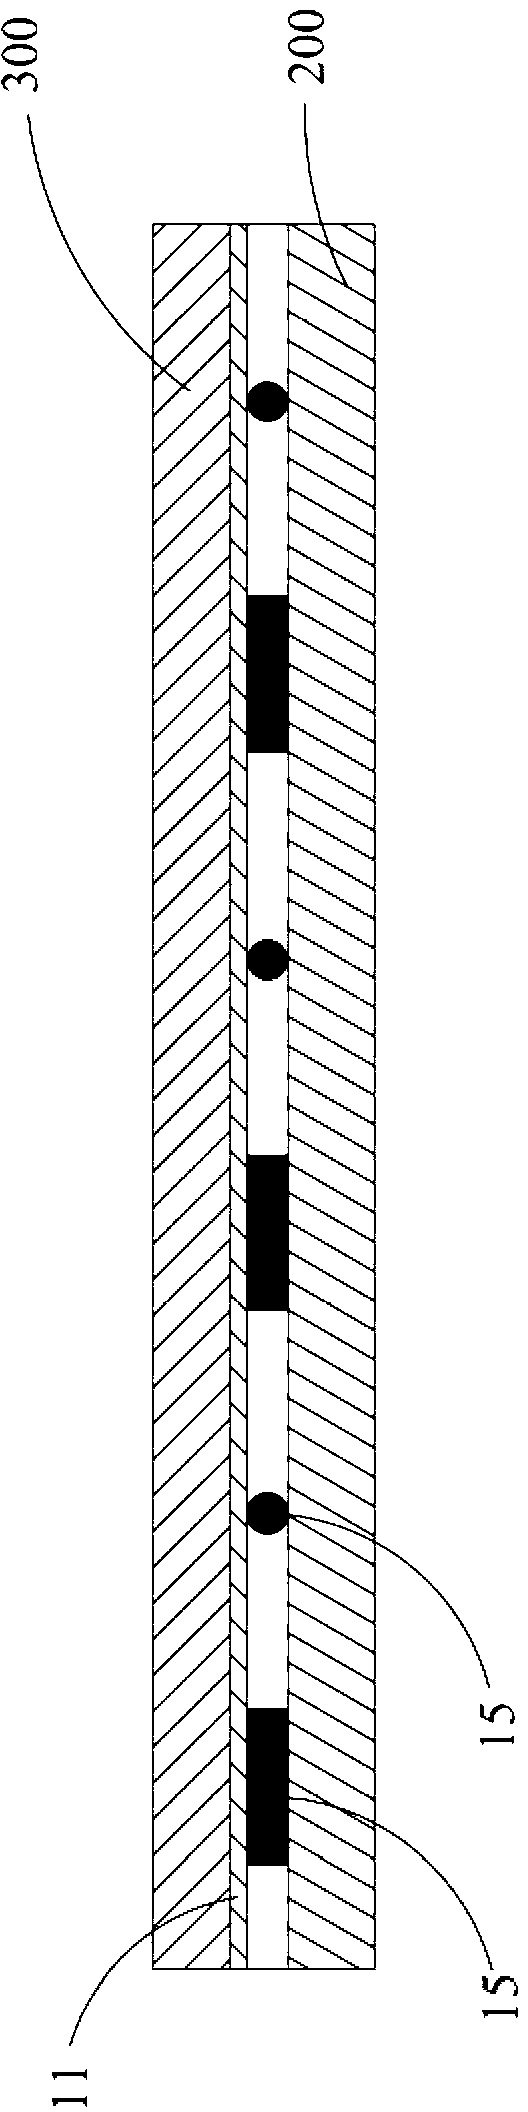 Steel plate-mortar combined structure